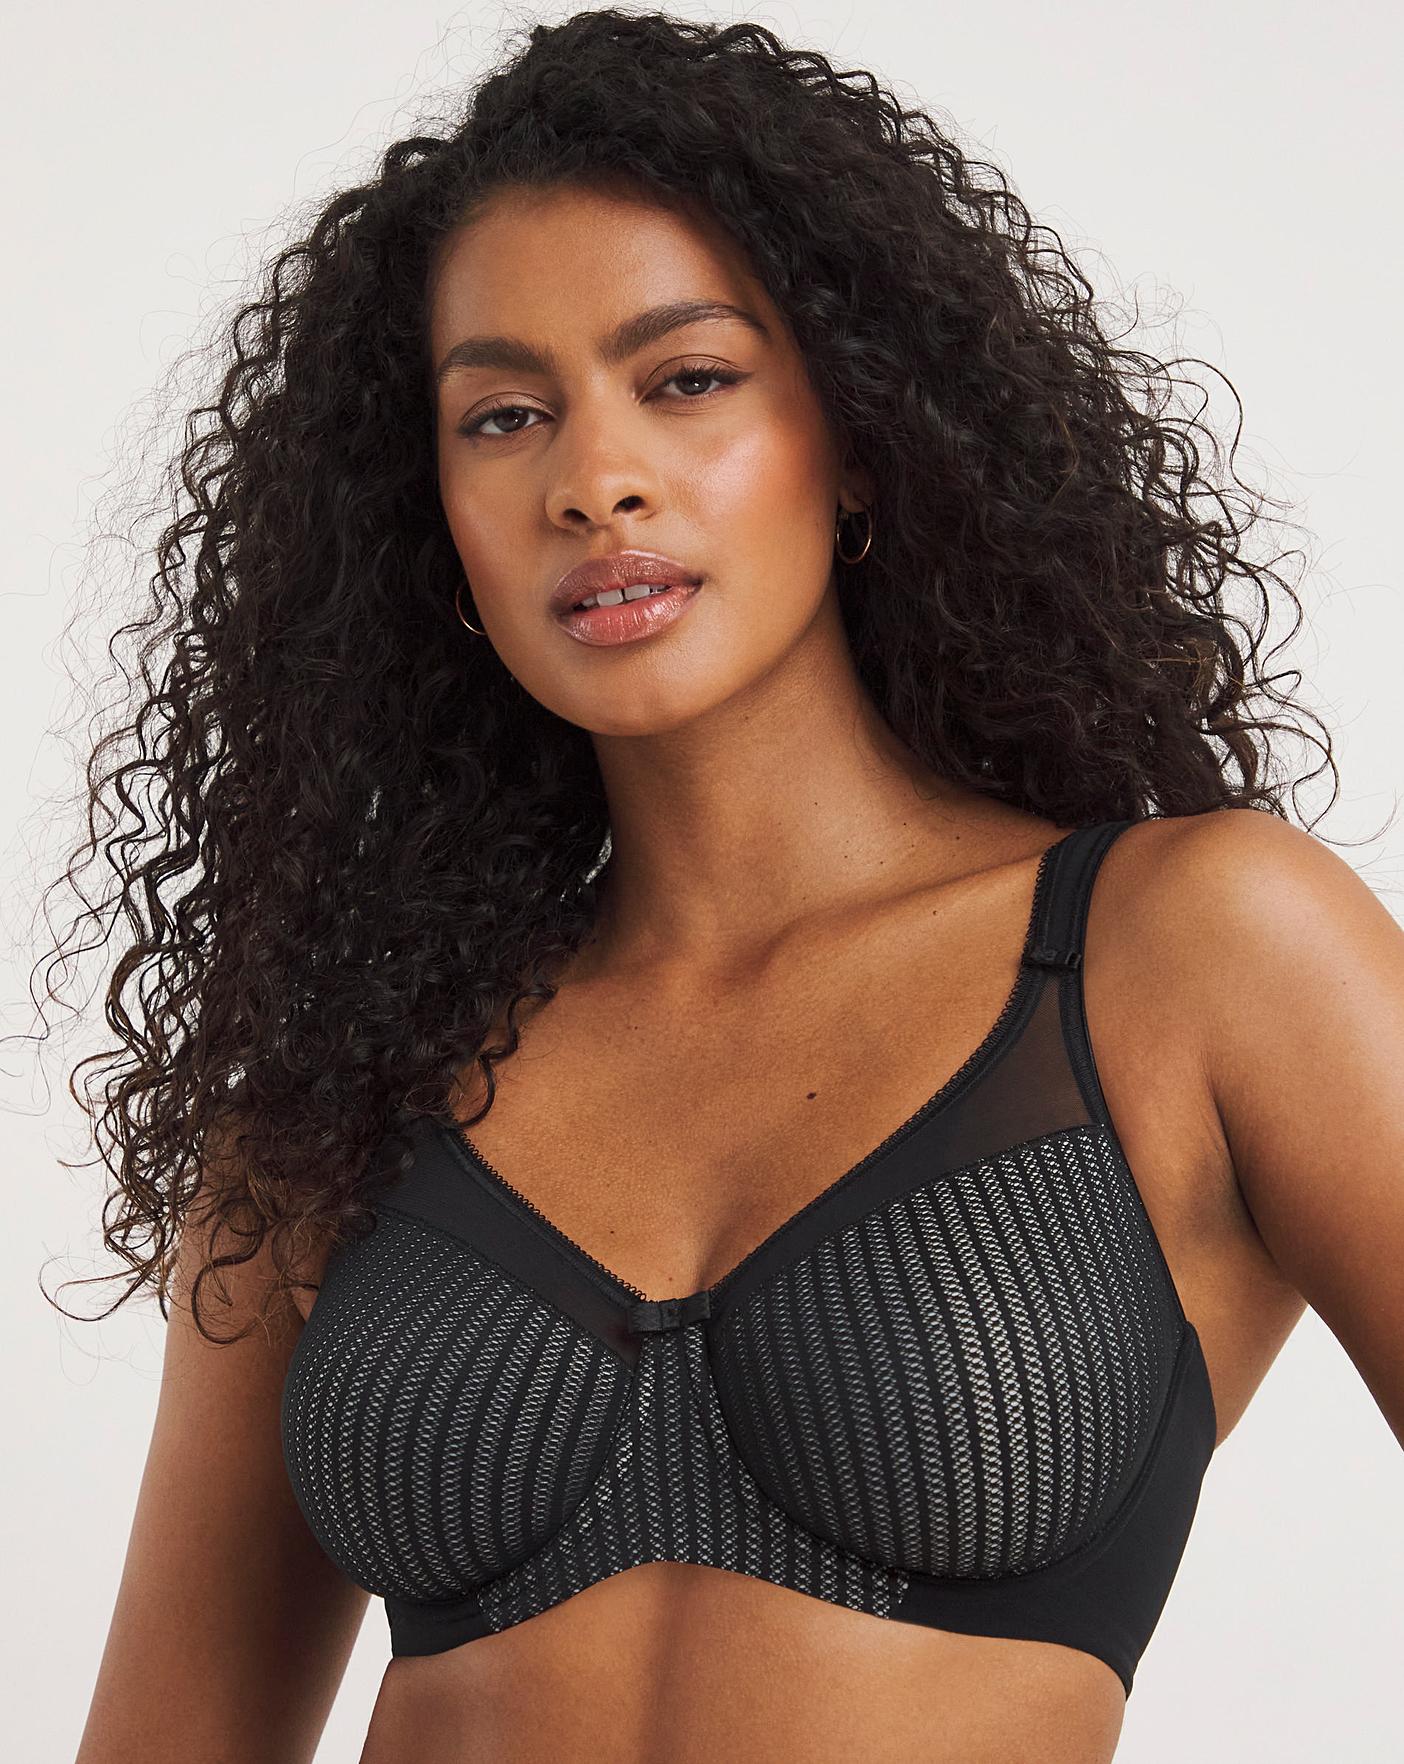 Berlei UK on X: Our Beauty Minimiser Bra and matching Beauty Brief helps  support and reduce beautifully! Check out our Beauty Minimiser Bra in the  link -  #bra #lingerie #berlei #lingerieaddict #